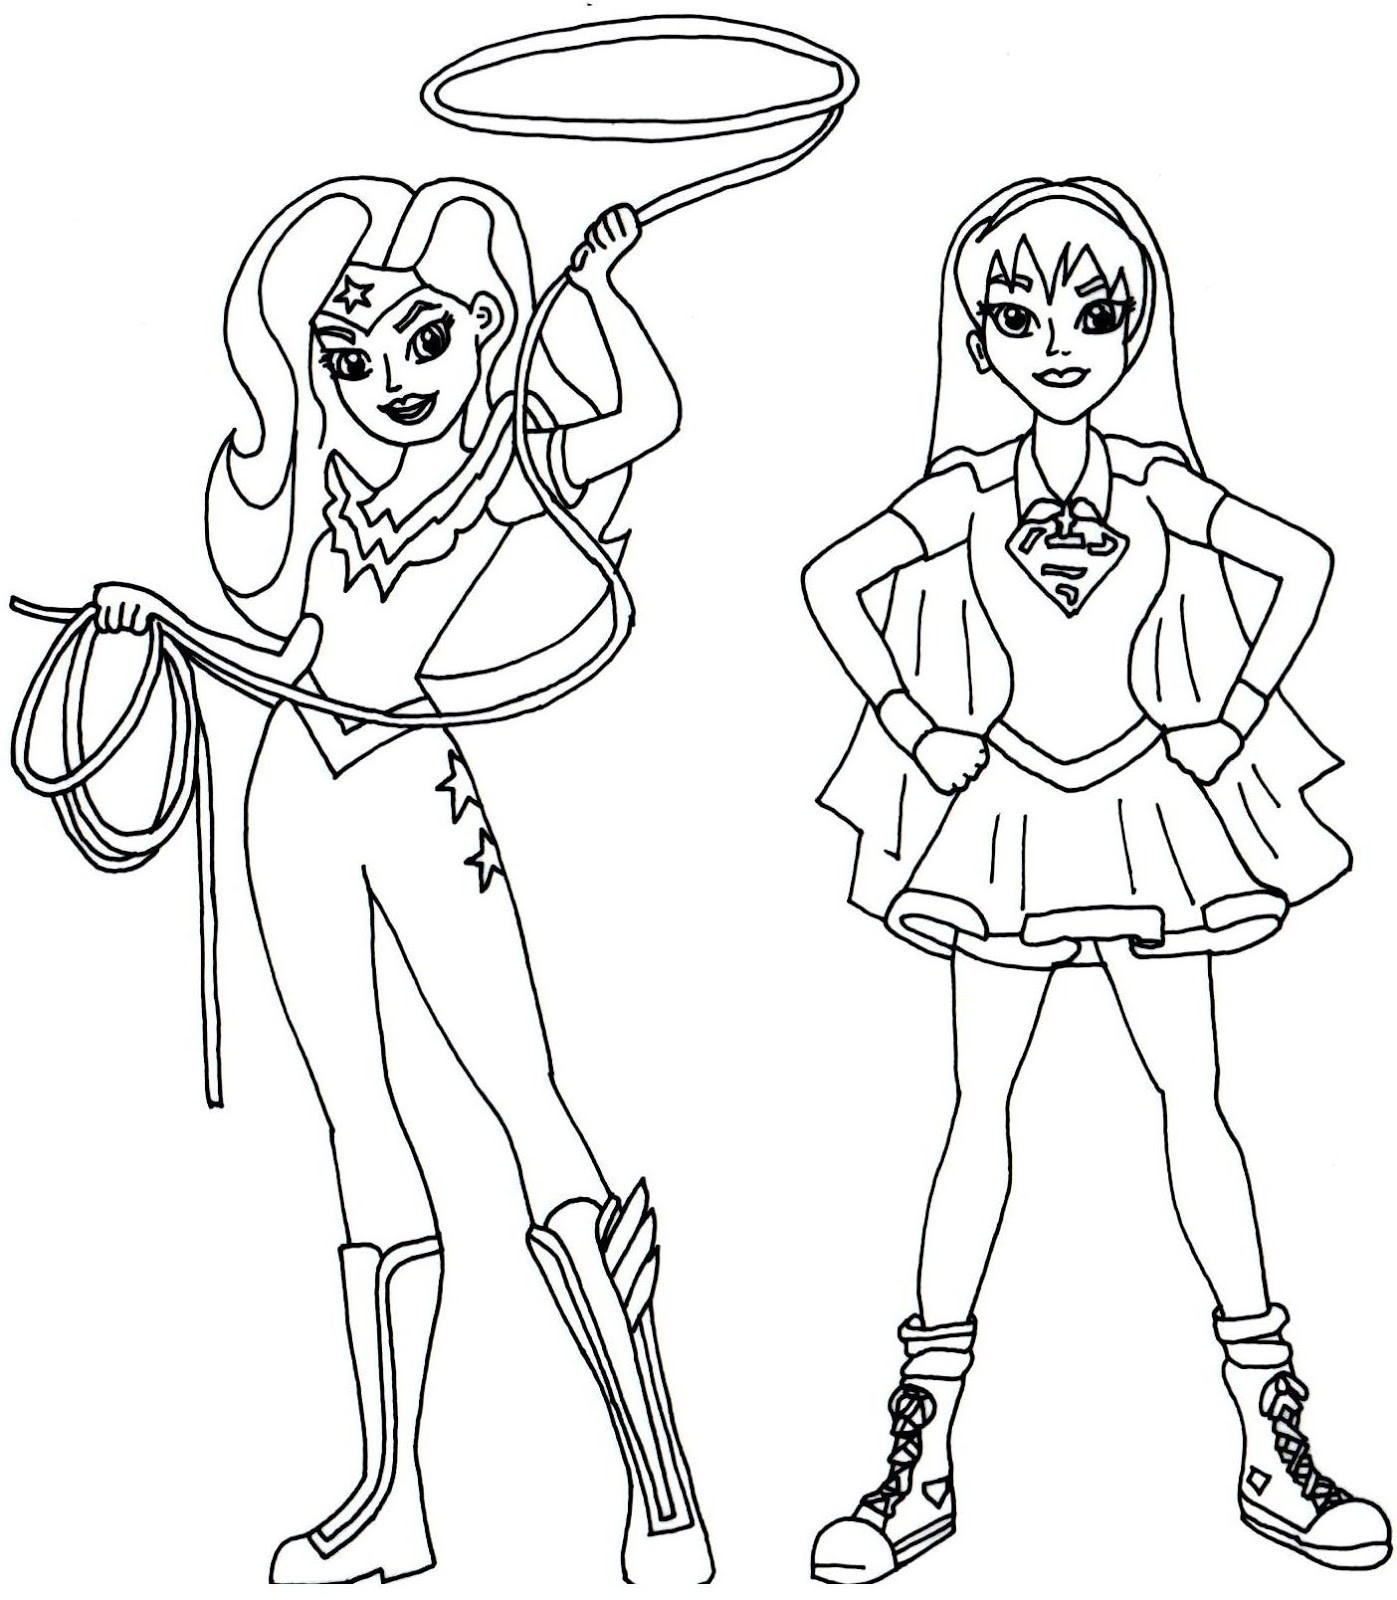 DC Superhero Girls Coloring Pages Best Coloring Pages For Kids